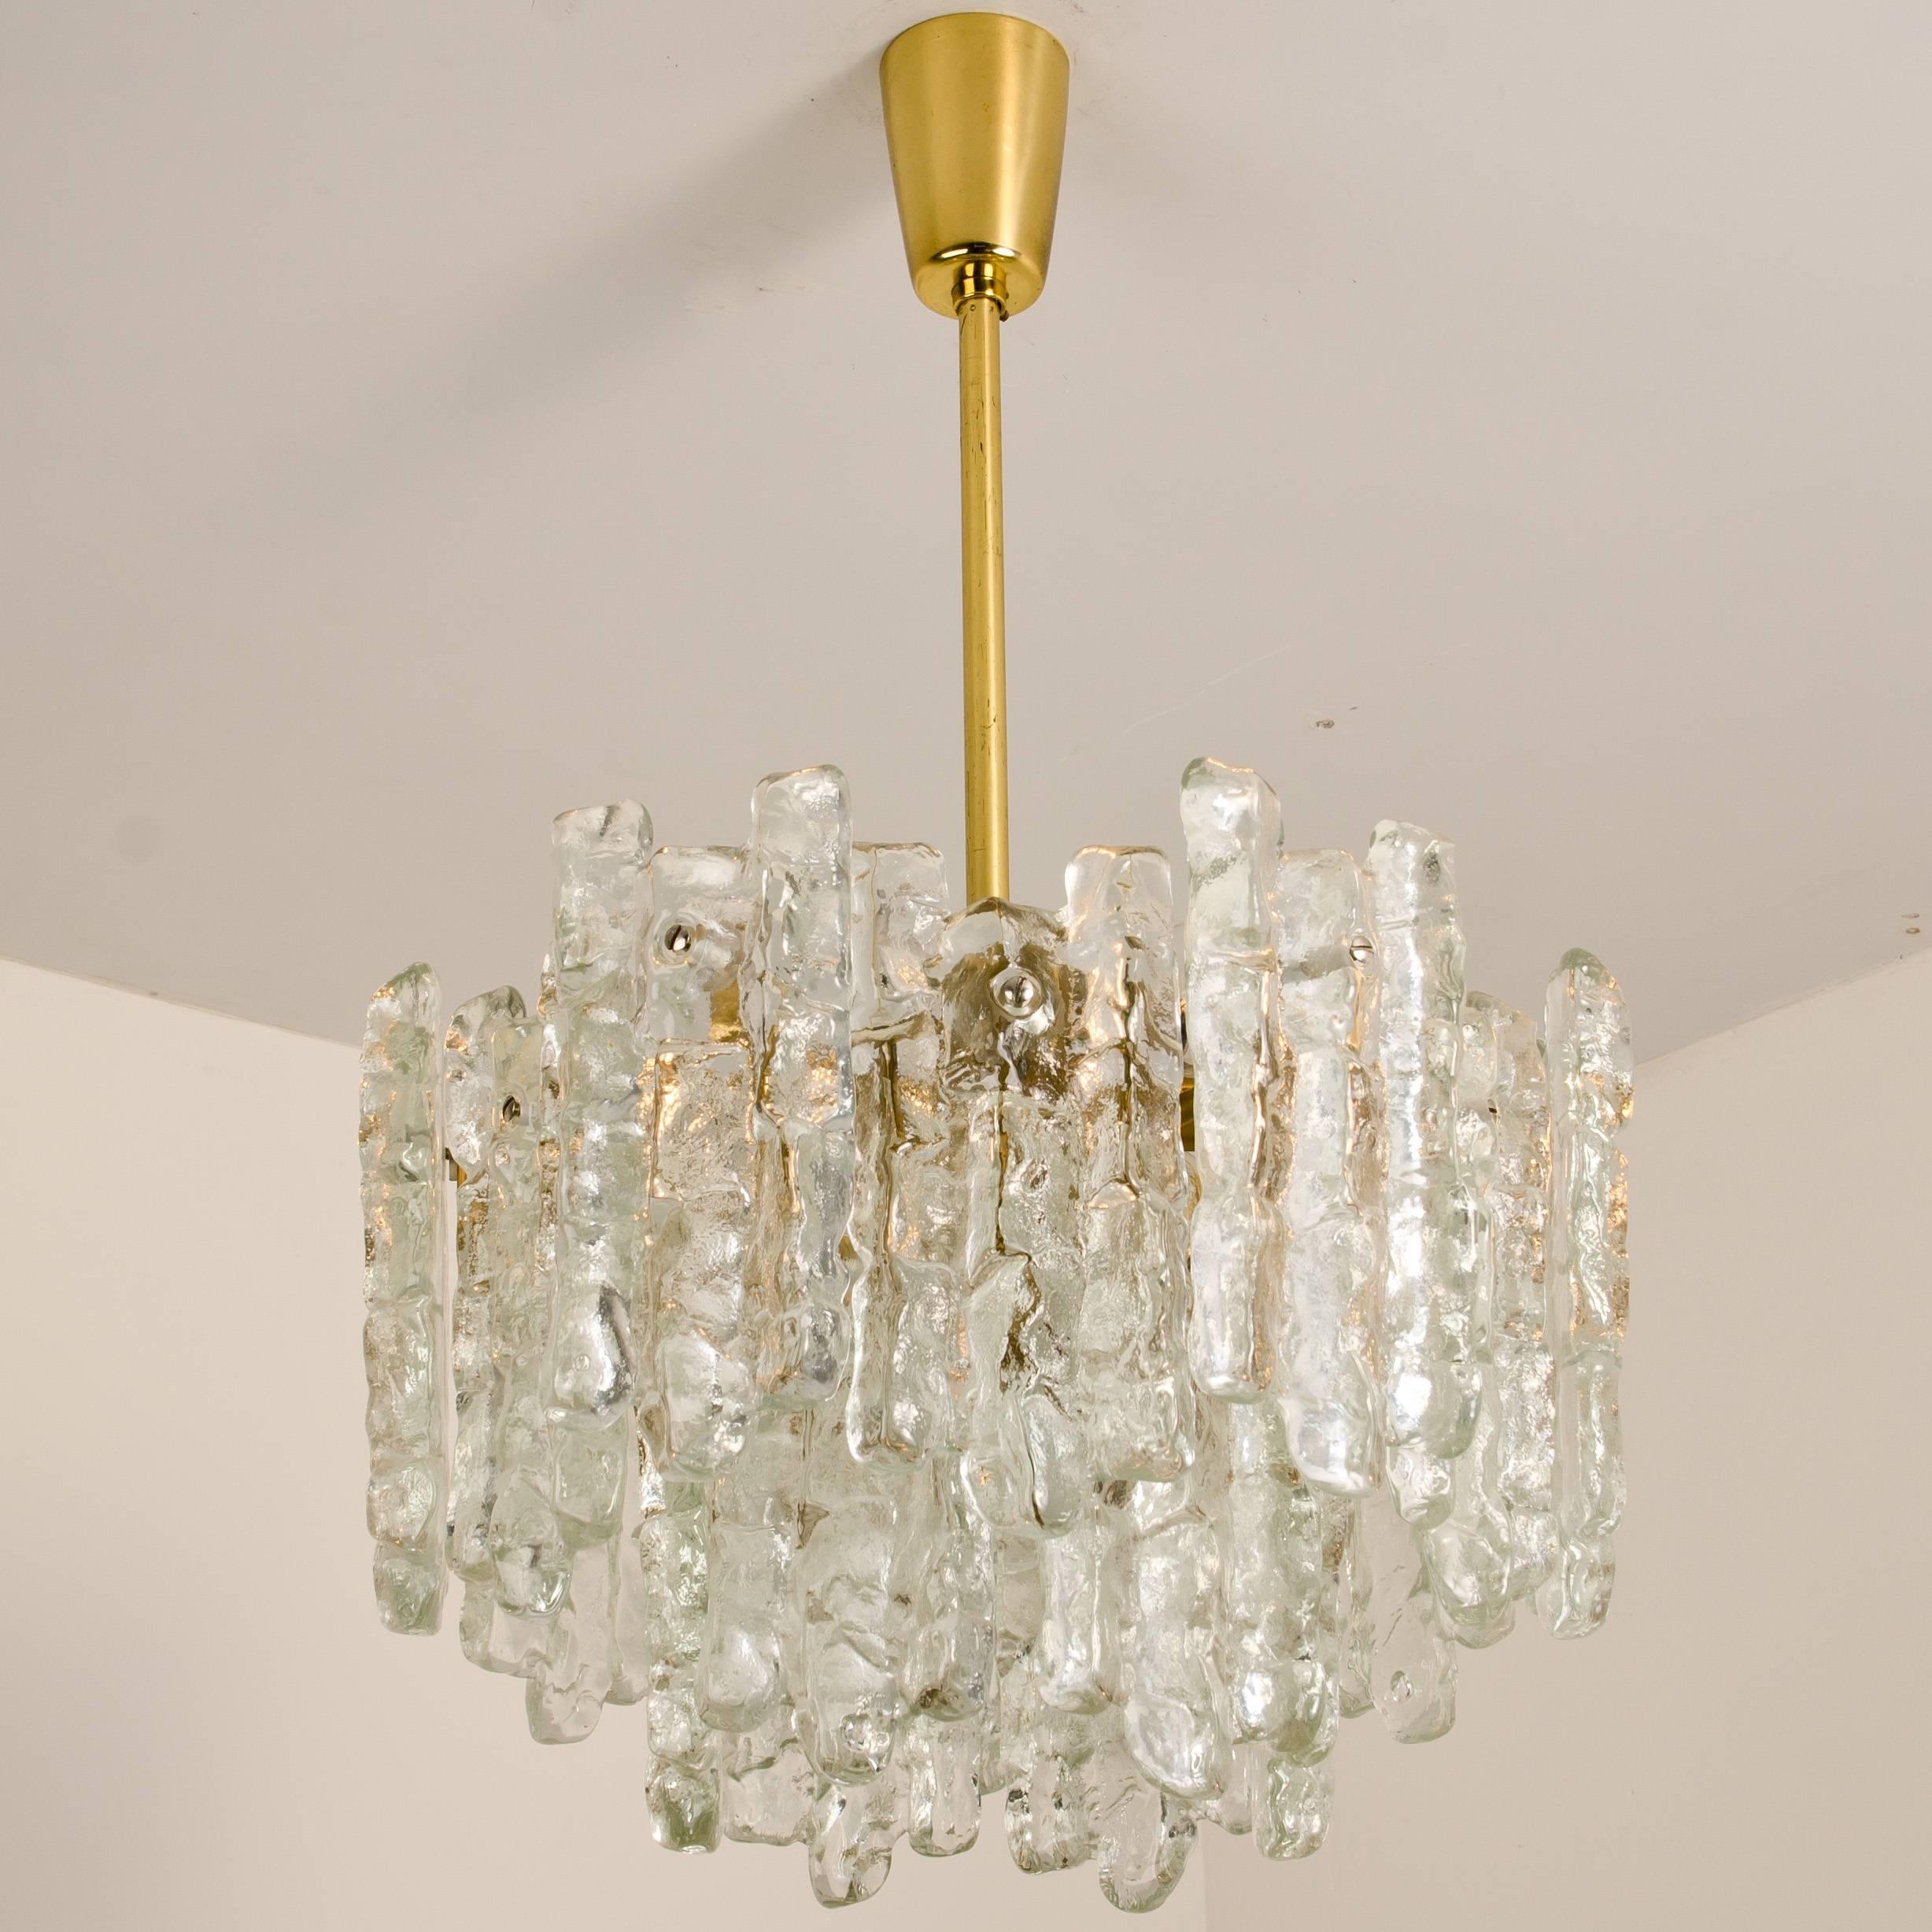 A very beautiful and elegant modern brass chandelier, manufactured by Kalmar Austria in the 1970s. Lovely design, each chandelier has eight sockets (E27) and two layers of extremely stylish textured solid ice glass sheets (18 pieces) dangling on it.